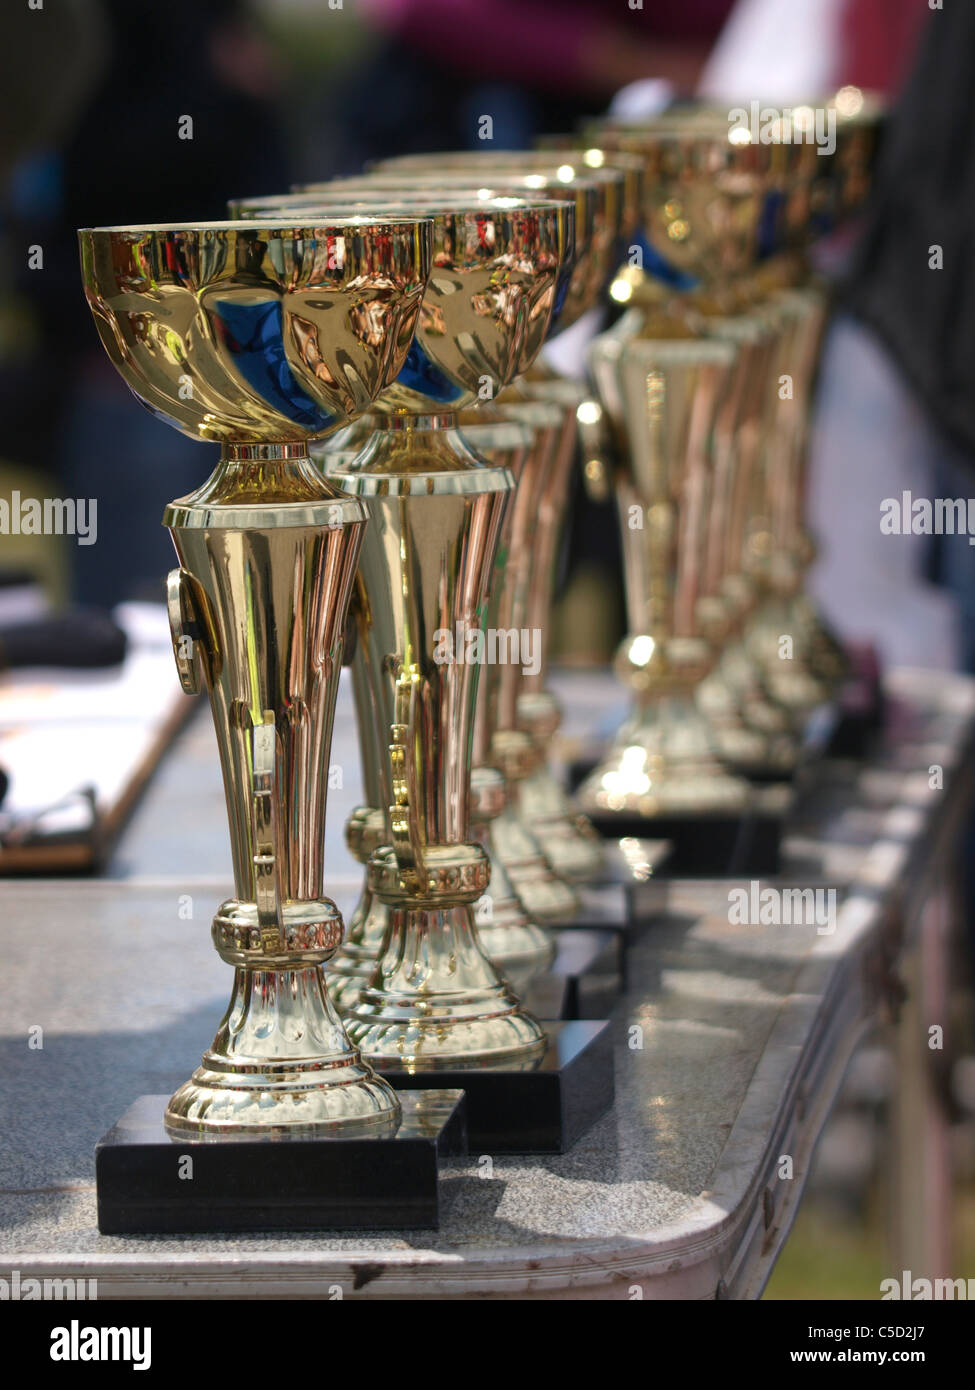 Trophies for sporting event, UK Stock Photo